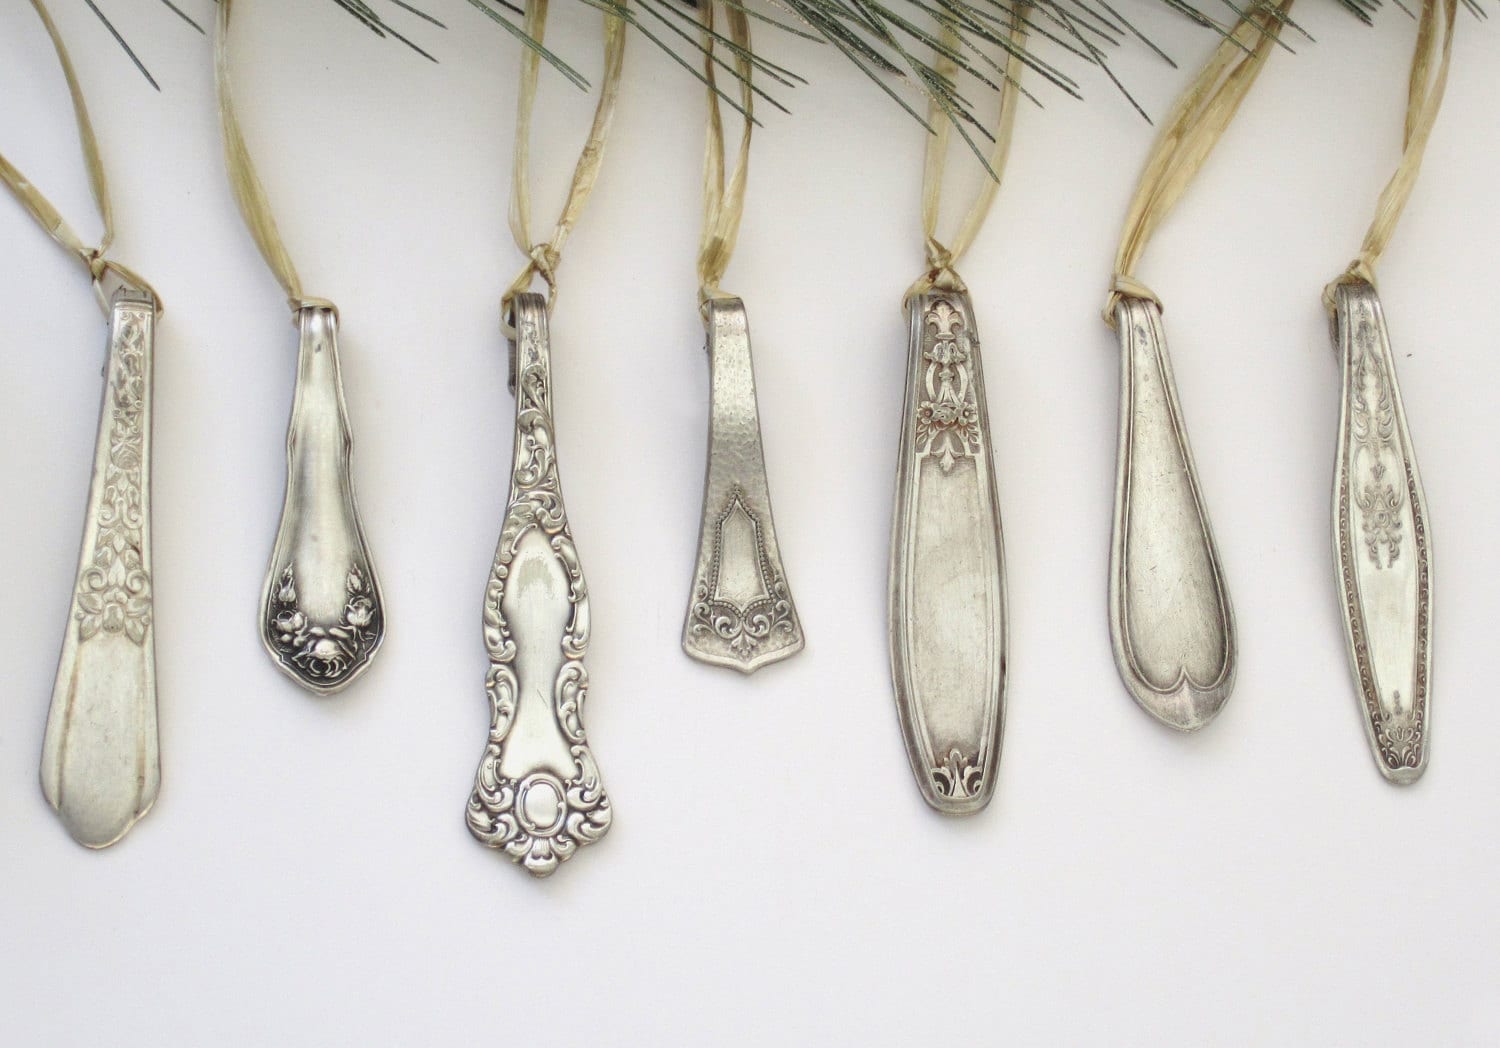 Silver spoon Icicle Ornaments - Set of 3,silver decor, christmas tree decor, holiday decoration vintage christmas, antique ornament handmade